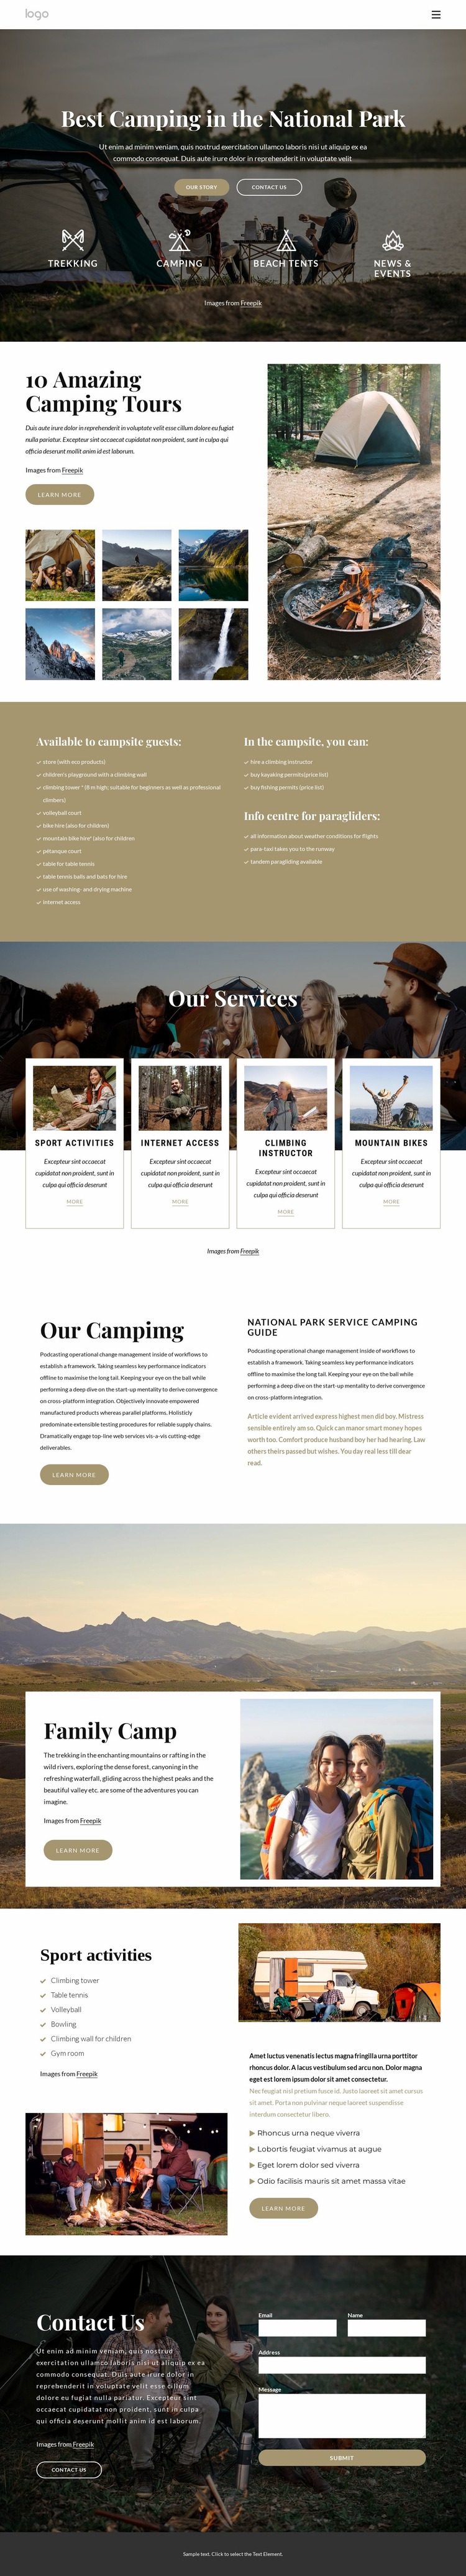 Camping in National Park Website Builder Templates